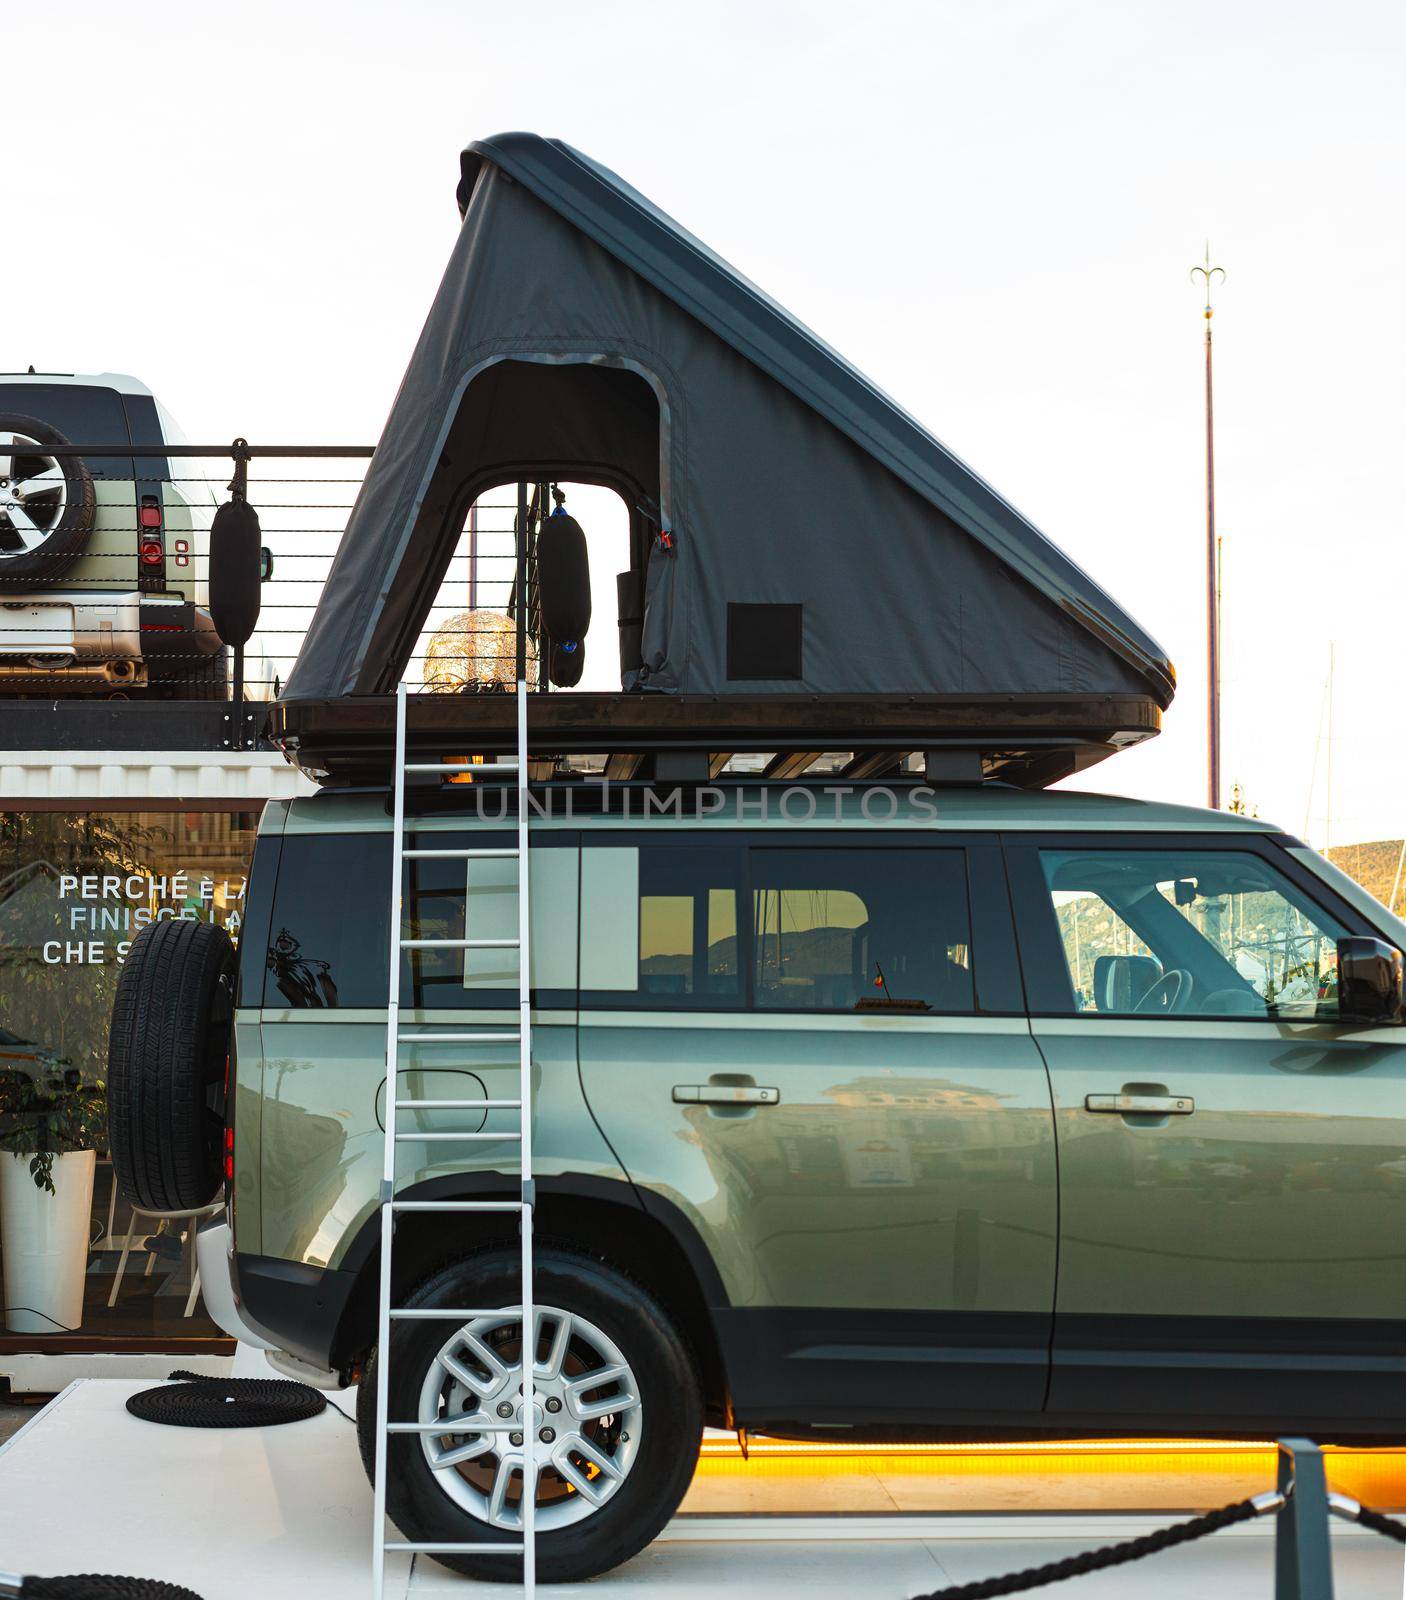 Roof top tent on a metallic green 4x4 car